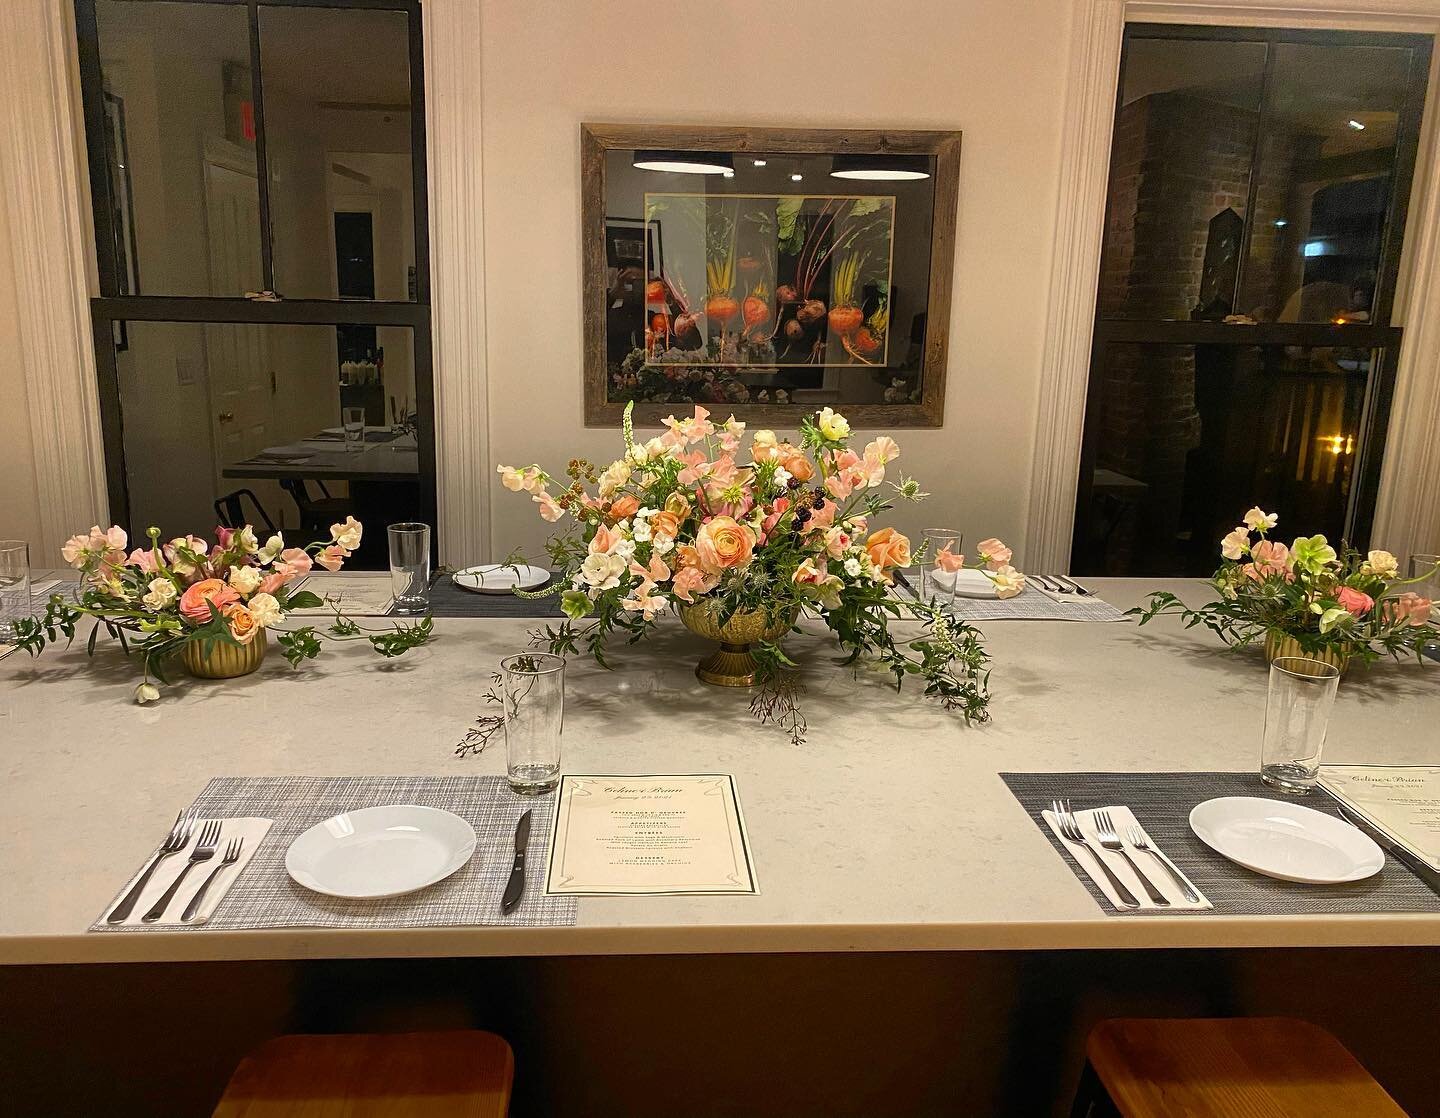 Montclair Culinary Academy offers you elegant surroundings and custom menus for your next private party.
.
.
.

#mca #montclairculinary #newjersey #montclairnj #nyc #familydinner #foodie #homecooking #wine #recipes #grill #healthylifestyle #farmtotab